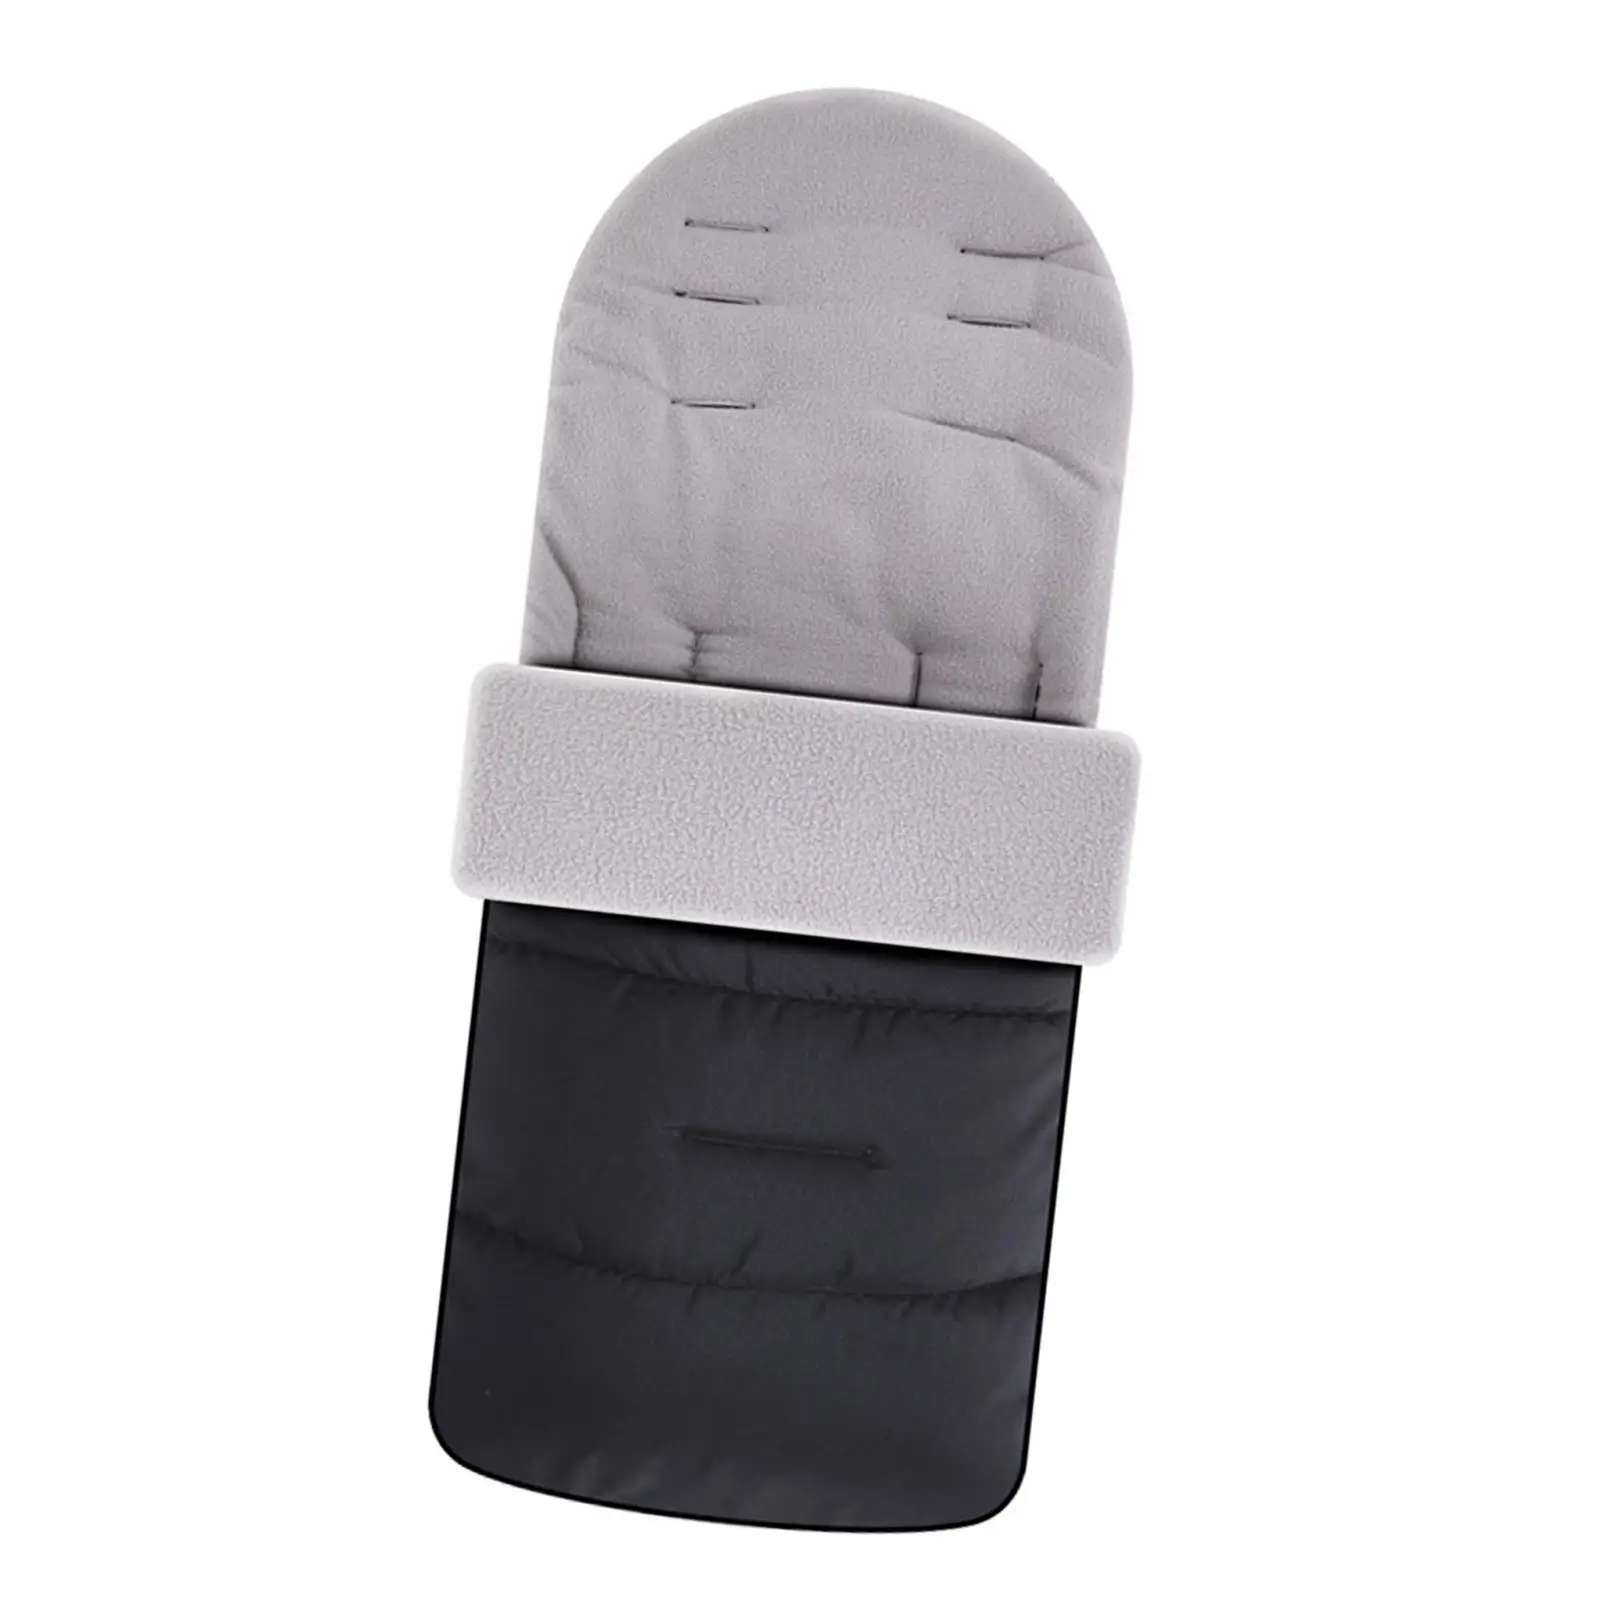 Baby Foot Cover Universal Warm Baby Stroller Footmuff Winter Foot Muff Pram Footmuff for Outdoor Buggy Pushchair Almost Stroller